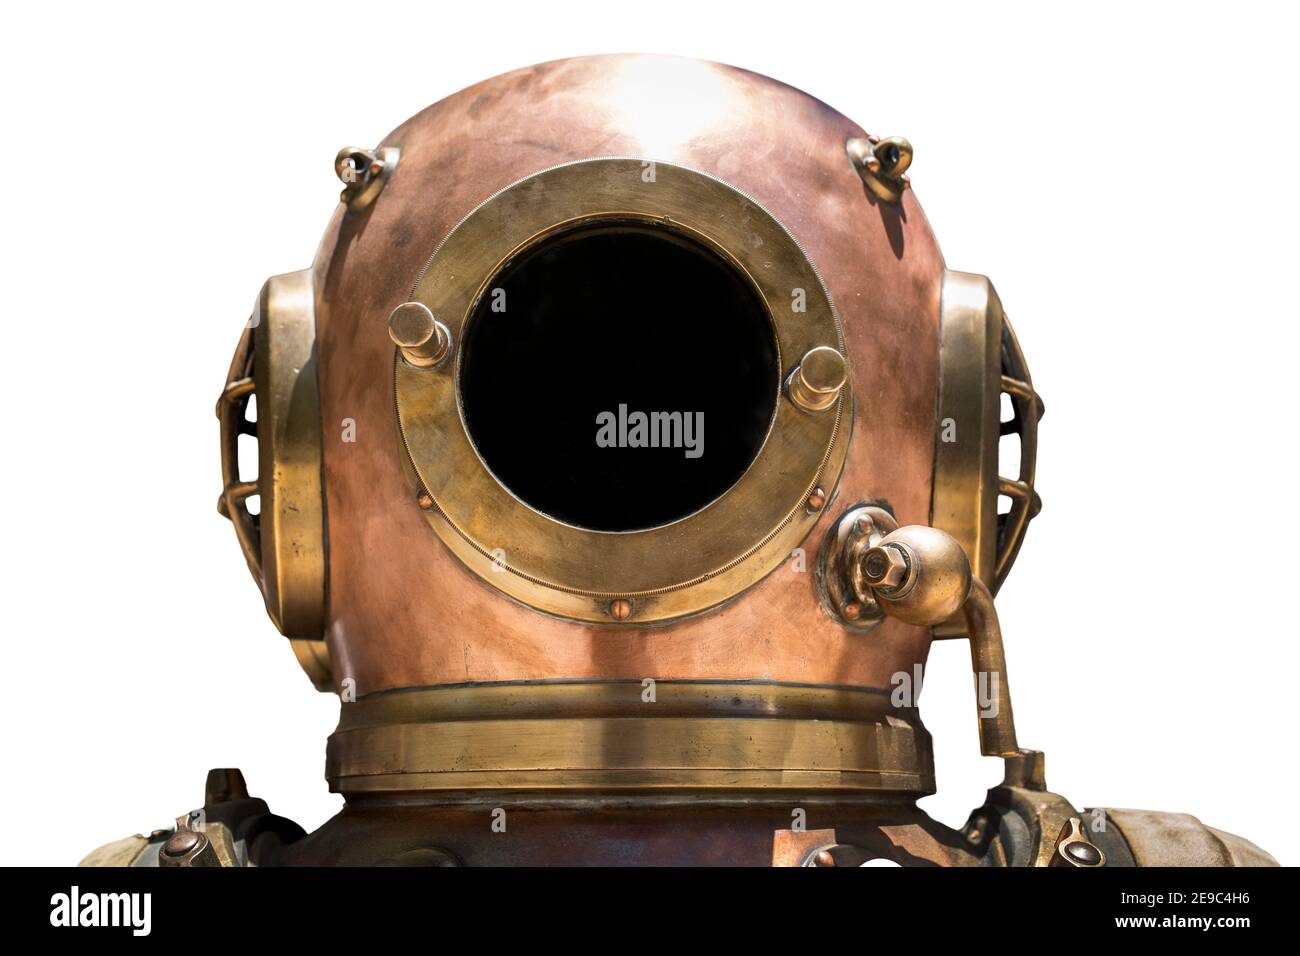 Vintage Copper and brass diving helmet. Isolated. Stock Photo